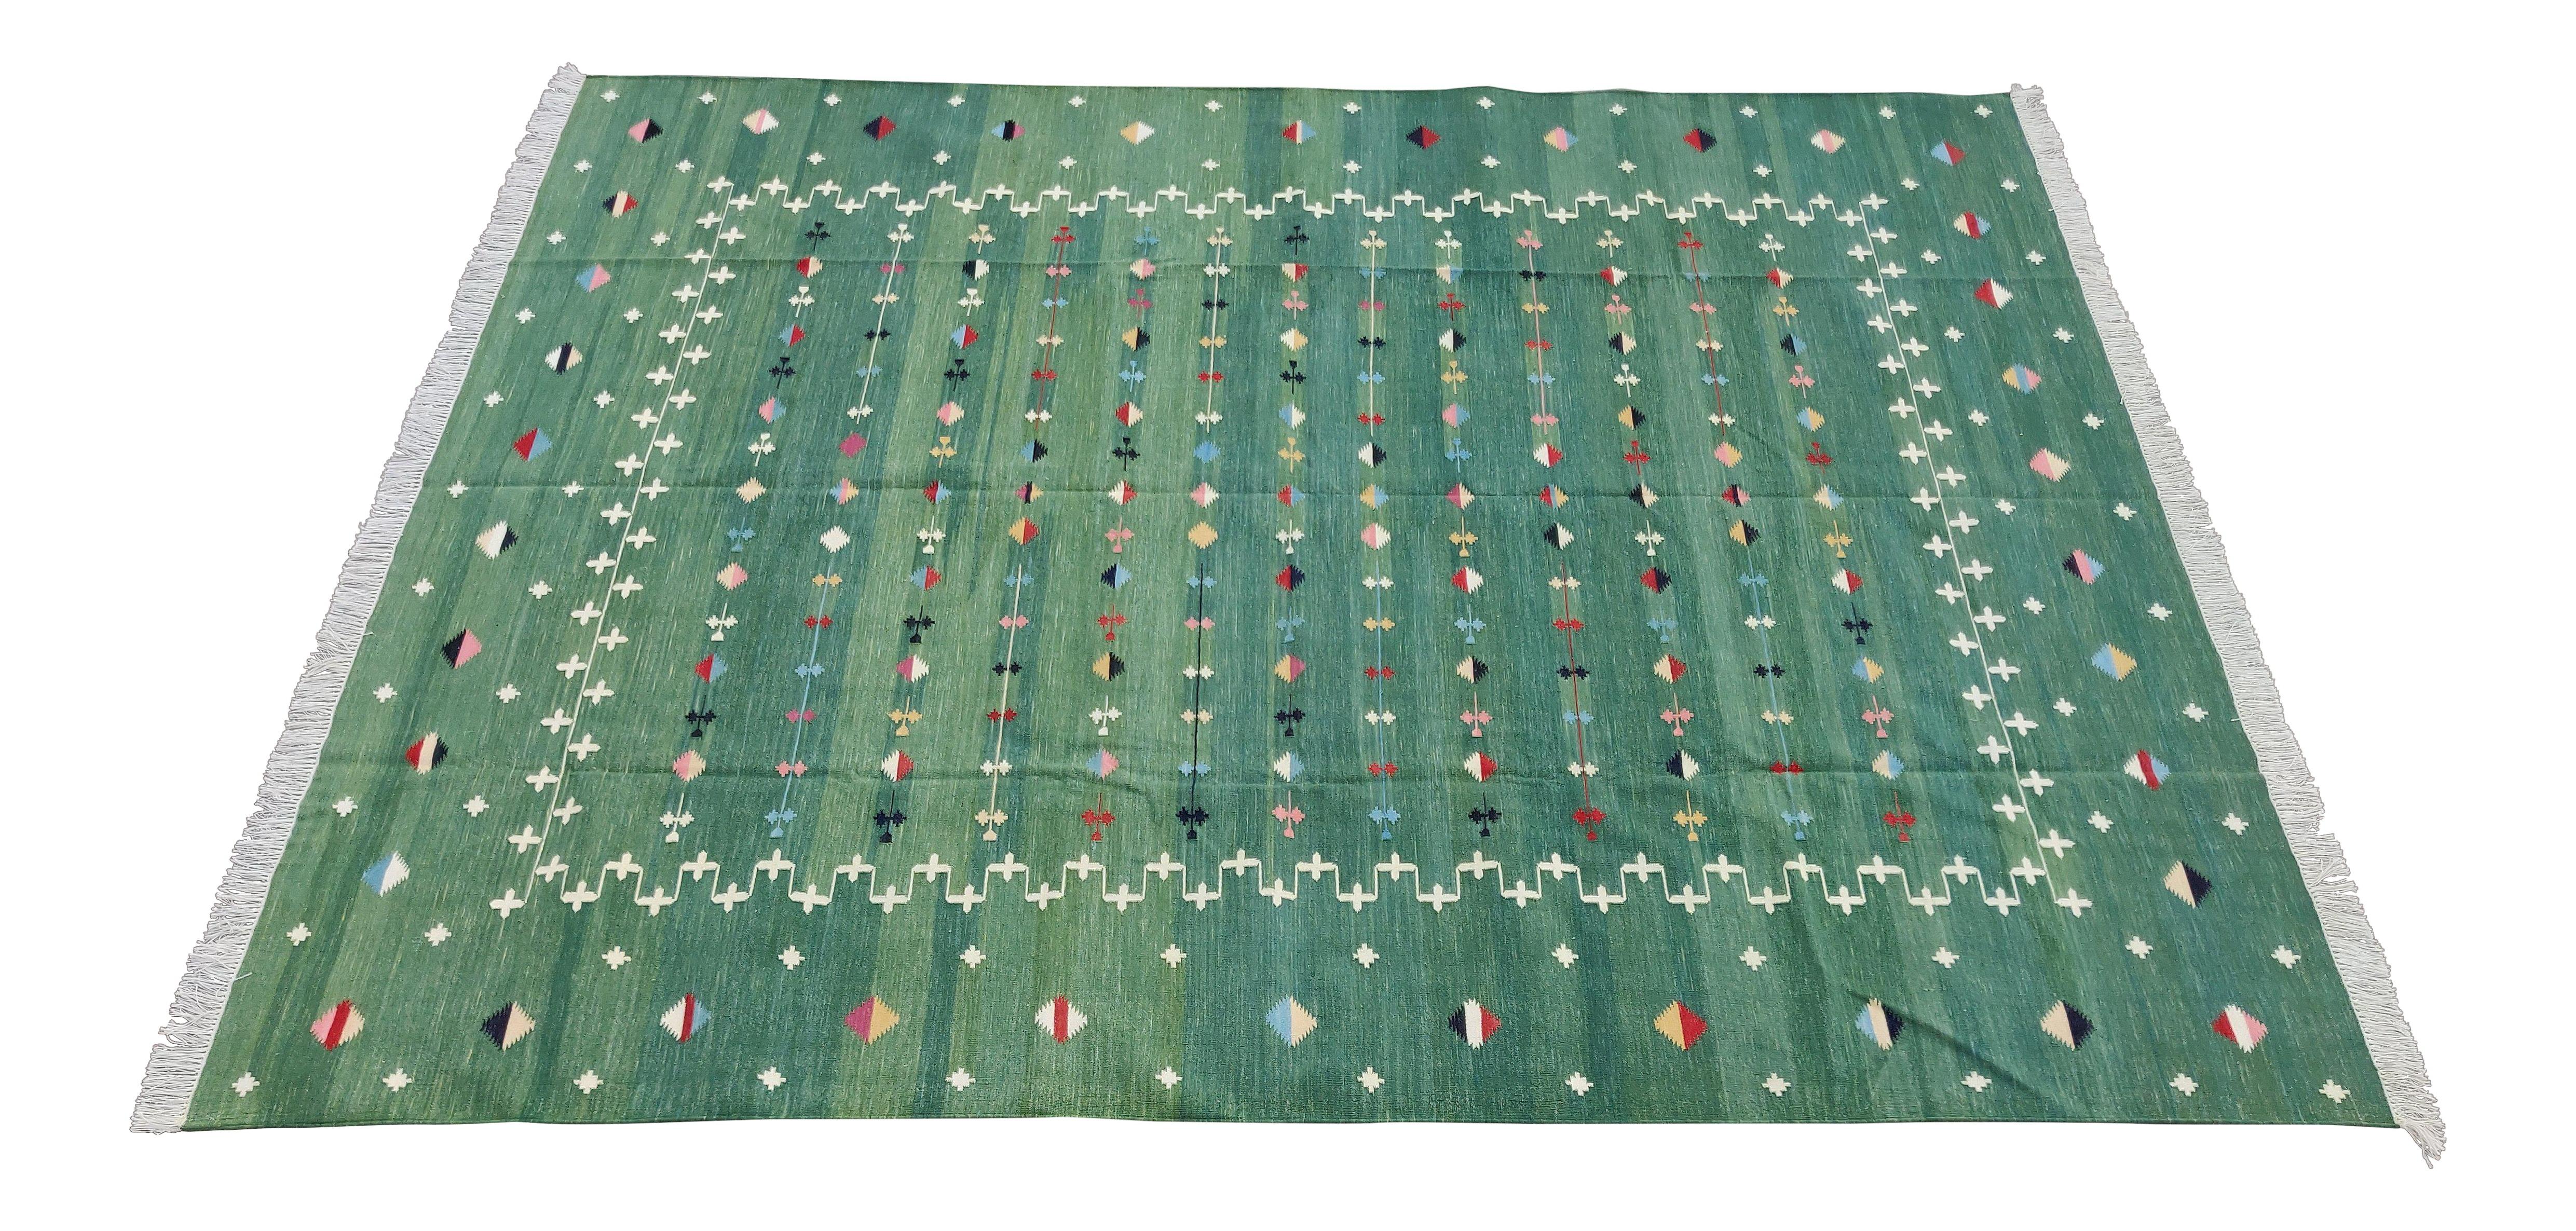 Hand-Woven Handmade Cotton Area Flat Weave Rug, 10x14 Green Shooting Star Indian Dhurrie For Sale